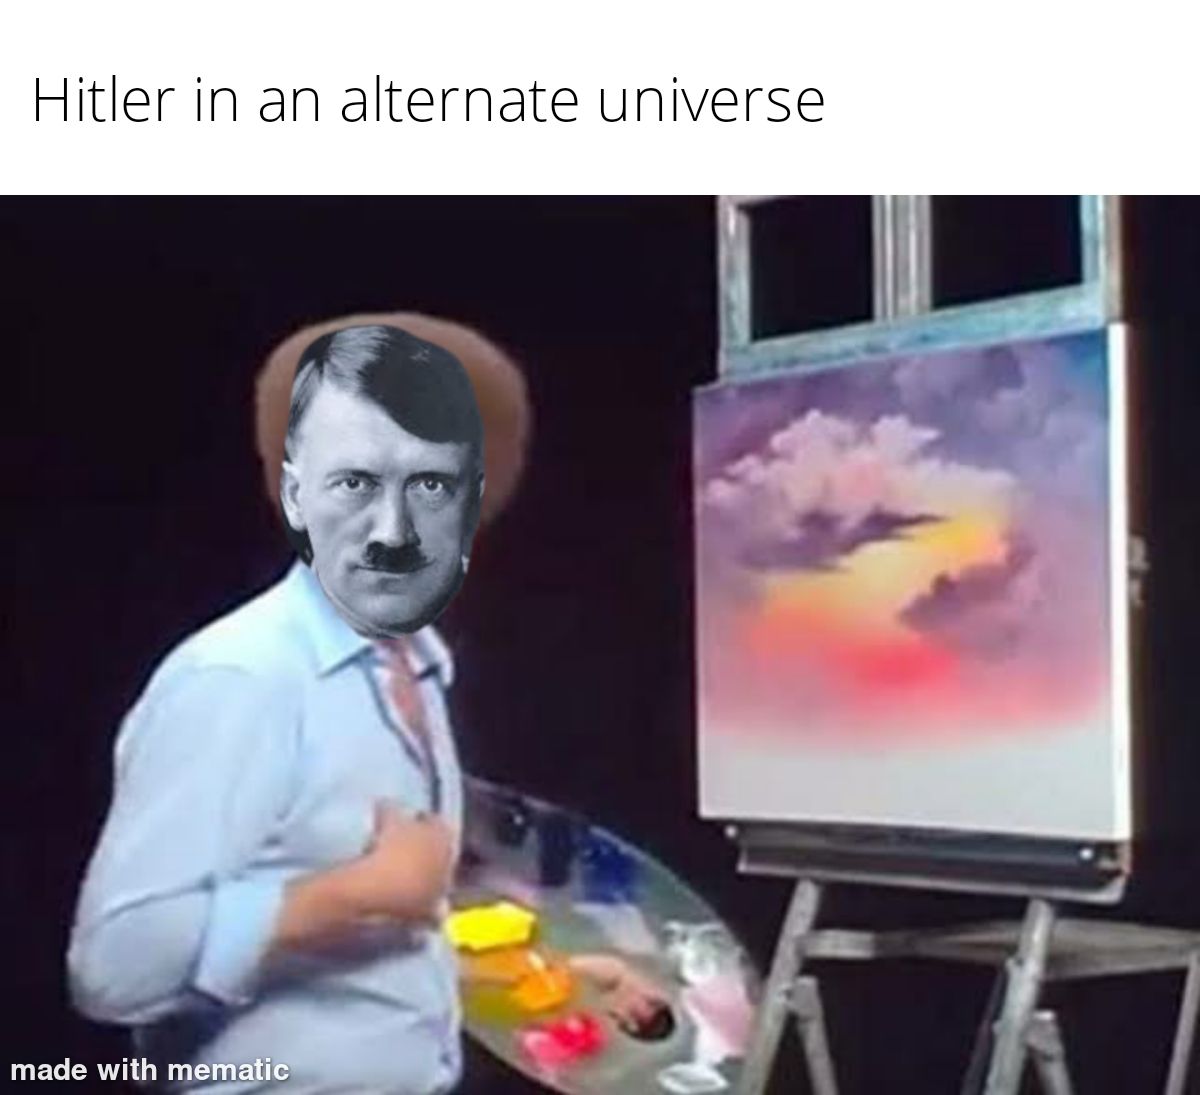 If only he'd made it into the art school